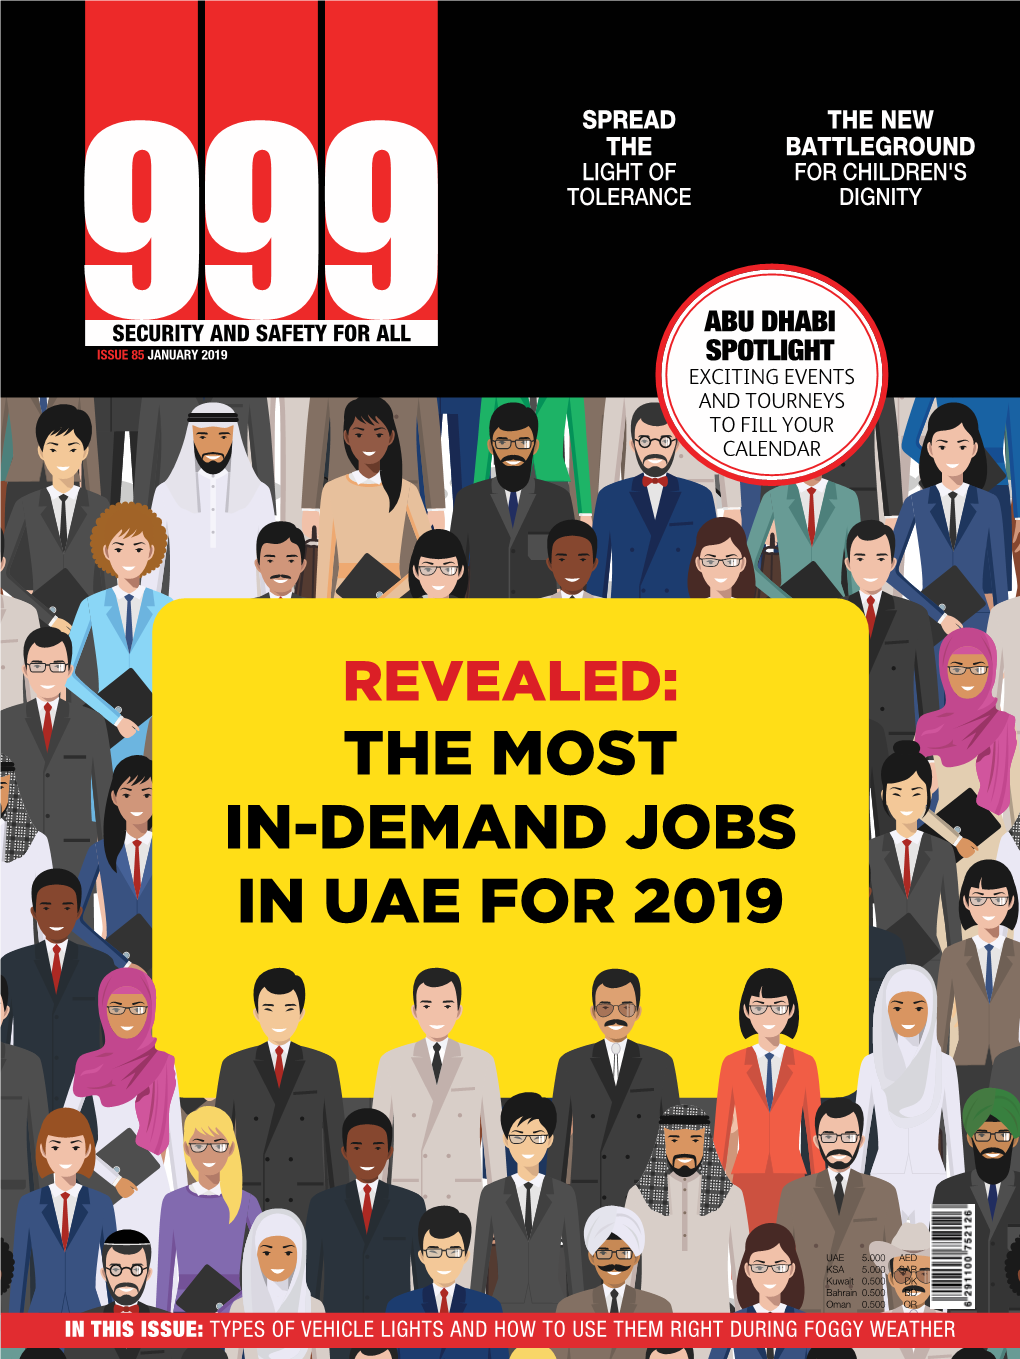 The Most In-Demand Jobs in Uae for 2019